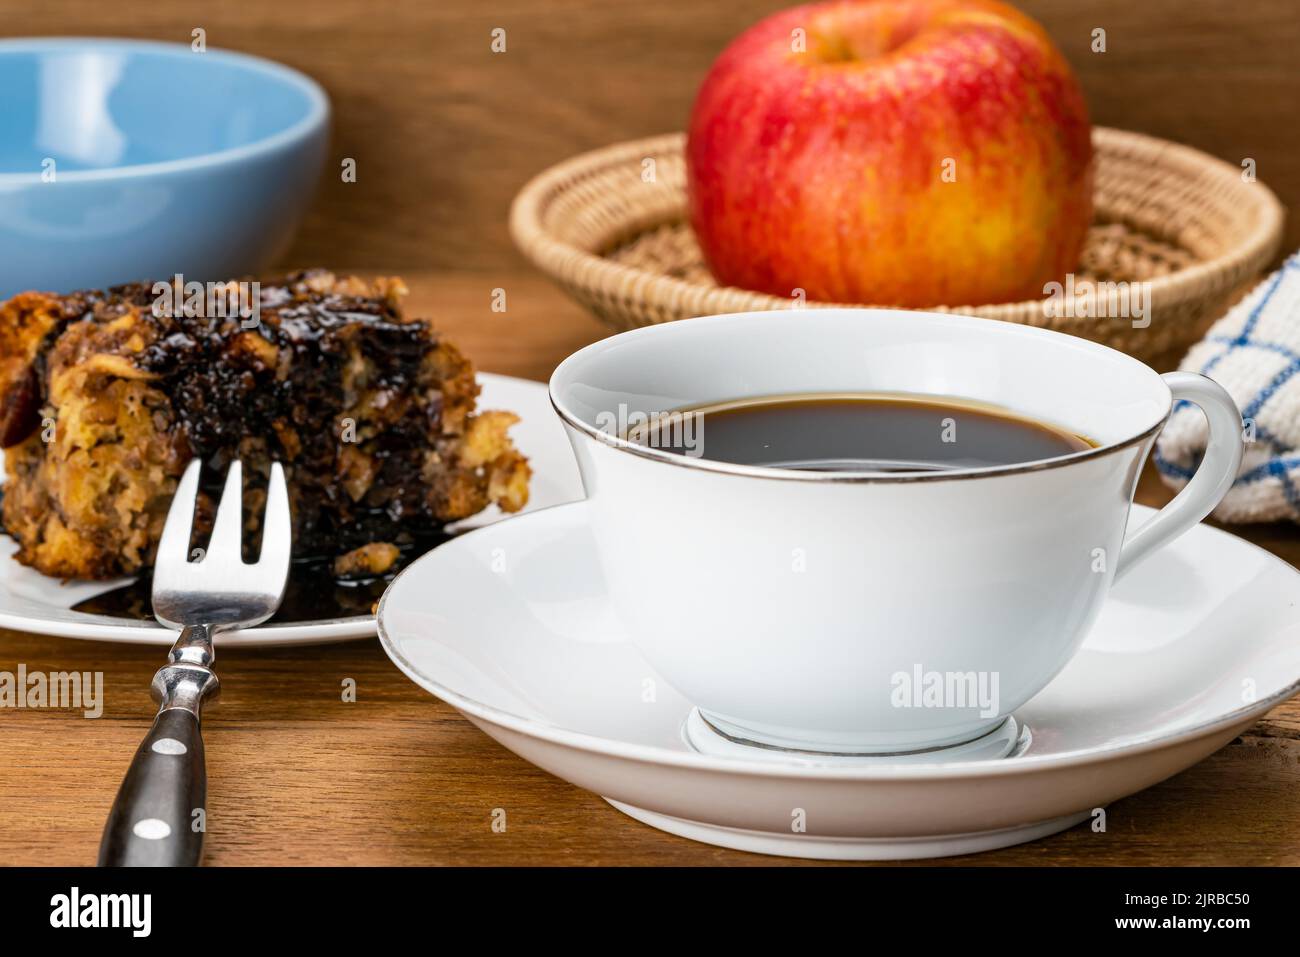 Black coffee in white ceramic cup on saucer with a portion of fruitcake poured with chocolate syrup in white ceramic dish, metal fork and a ripe red a Stock Photo